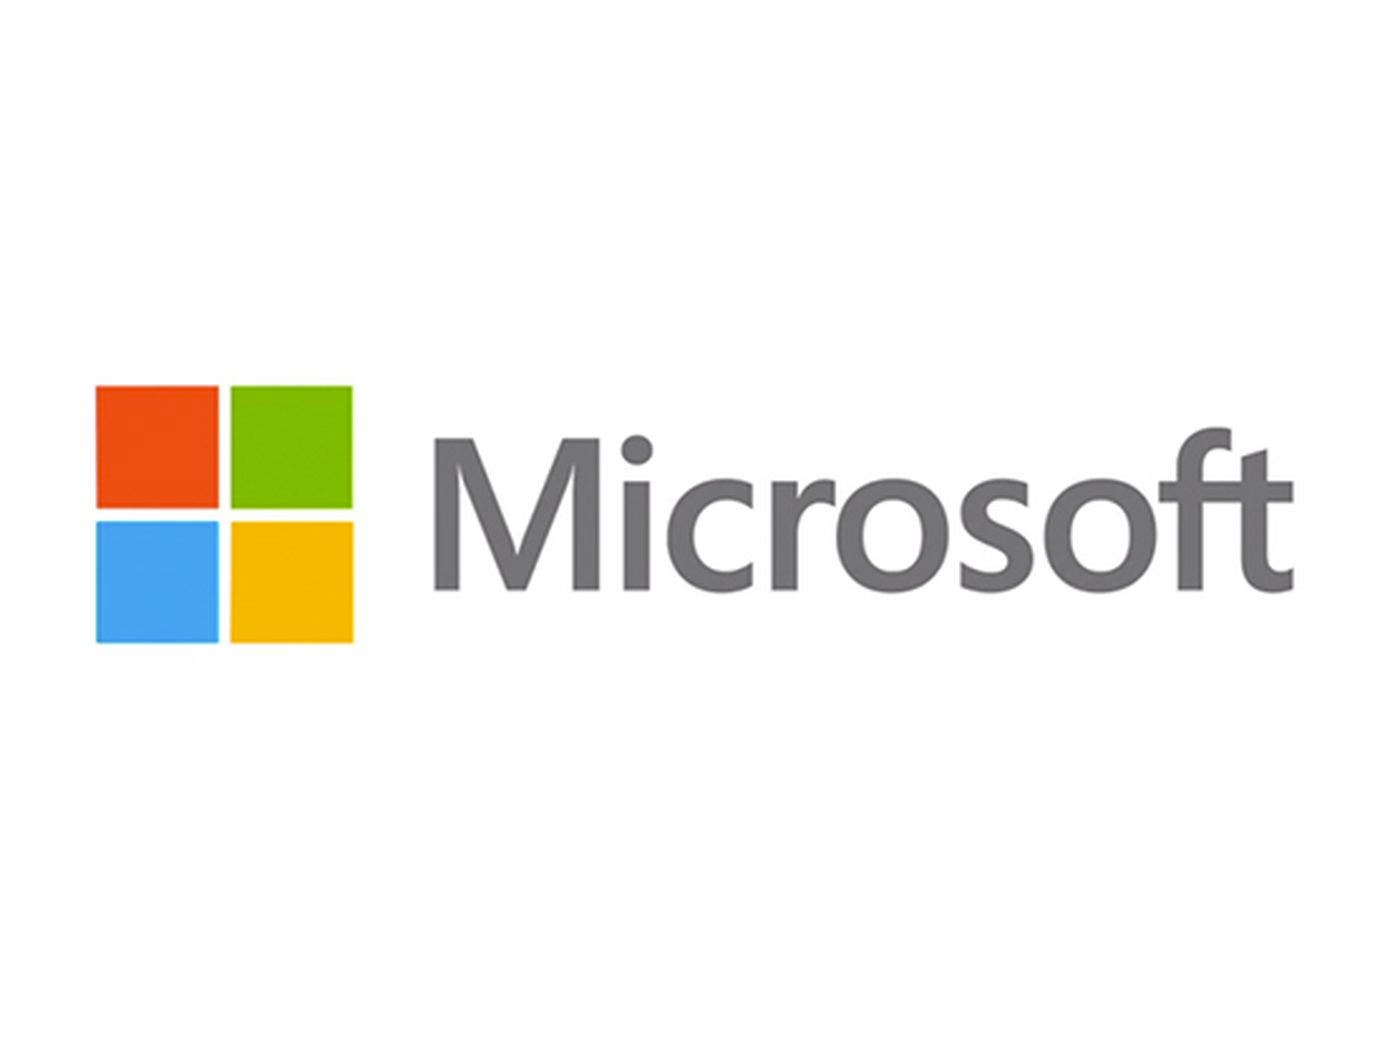 Several Analysts Cut Price Targets On Microsoft Following Q2 Earnings, But This Analyst Raises PT